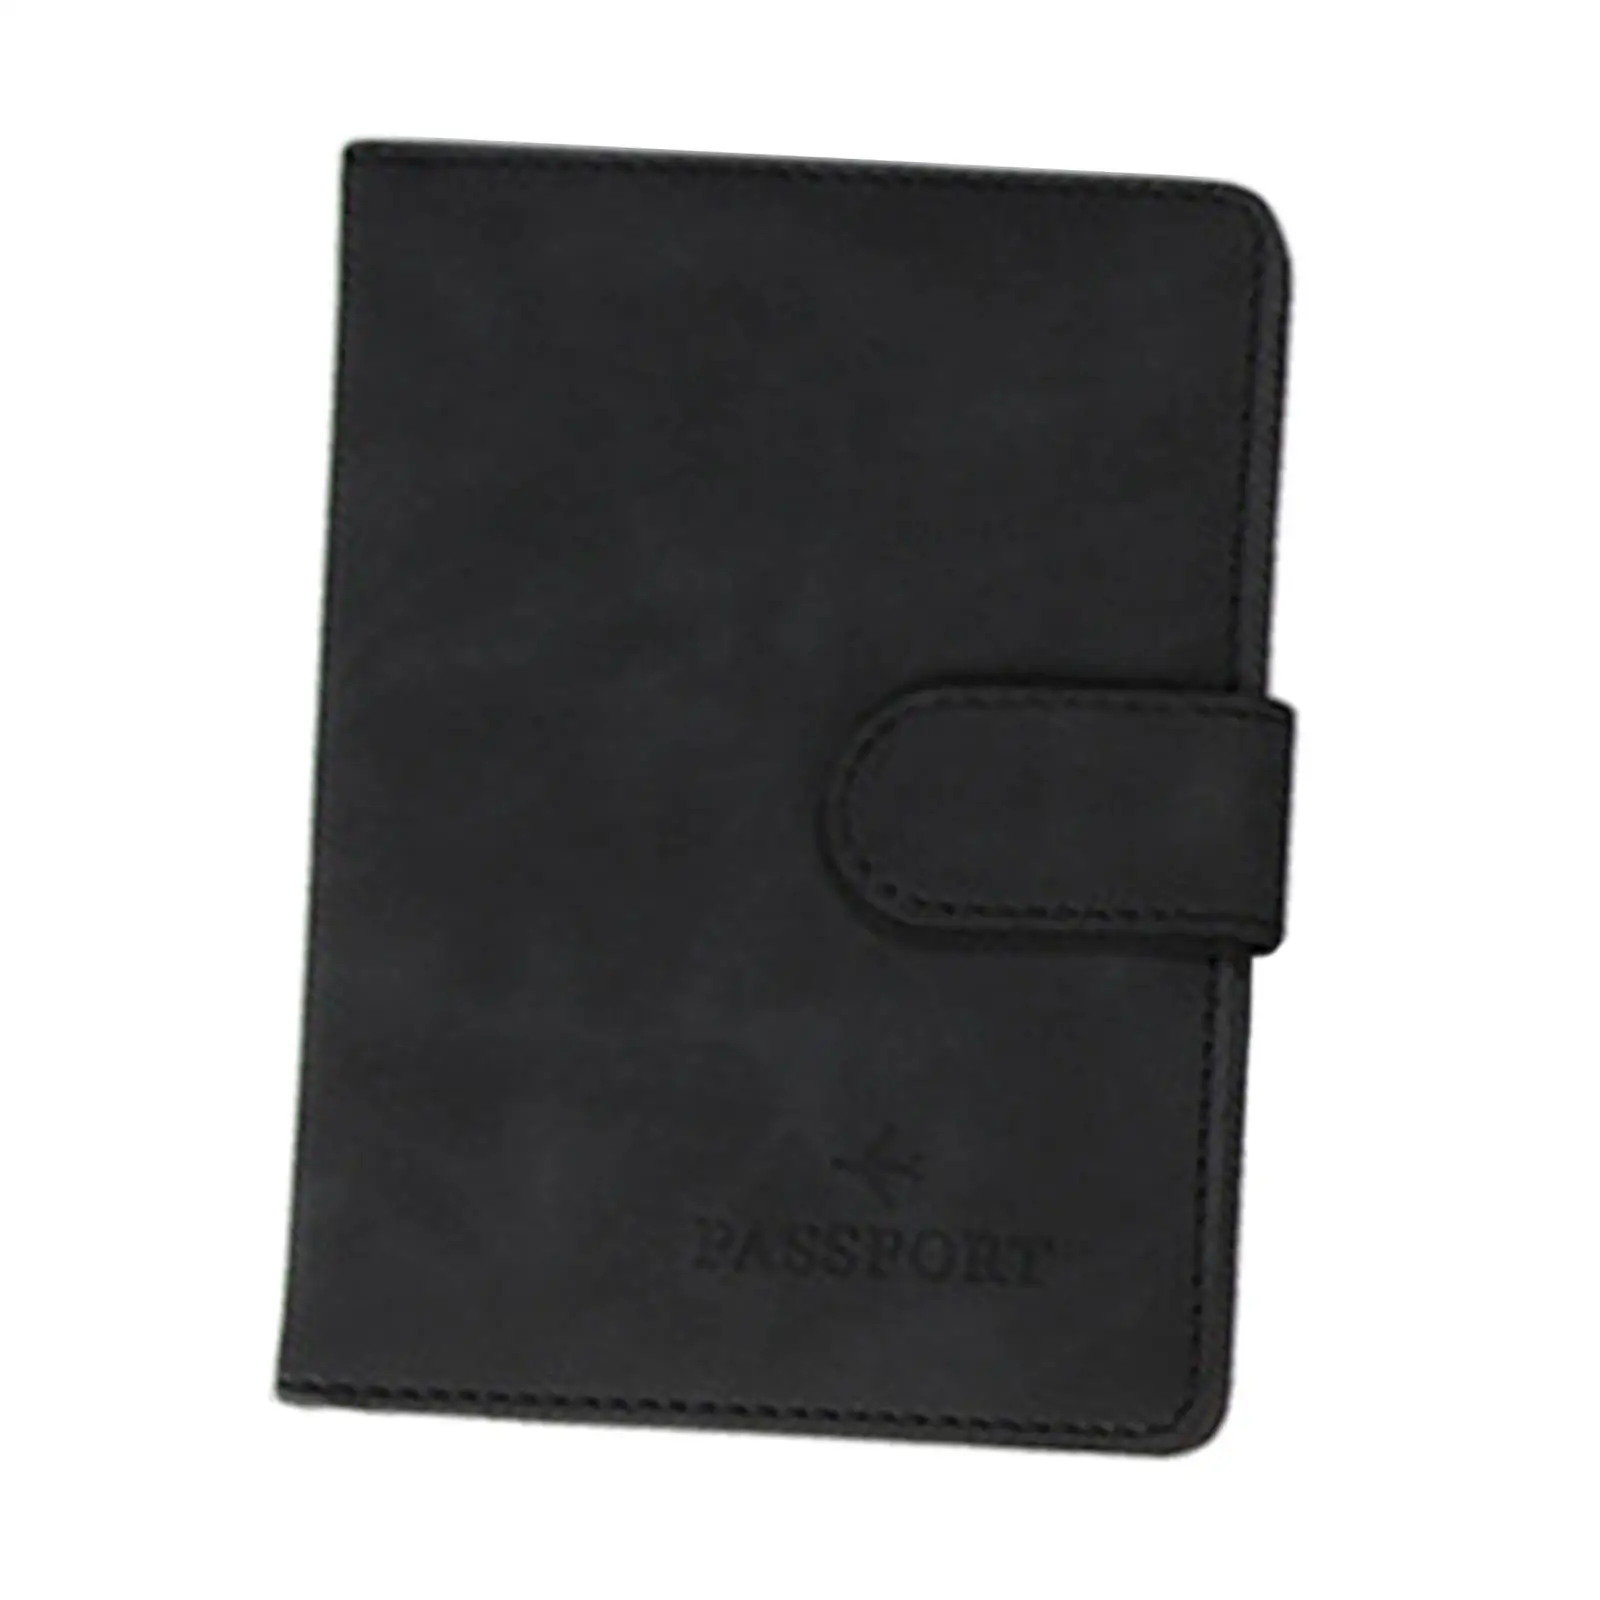 PU Leather Card Case Passport Cover Holder for Woman and Man Travel Family